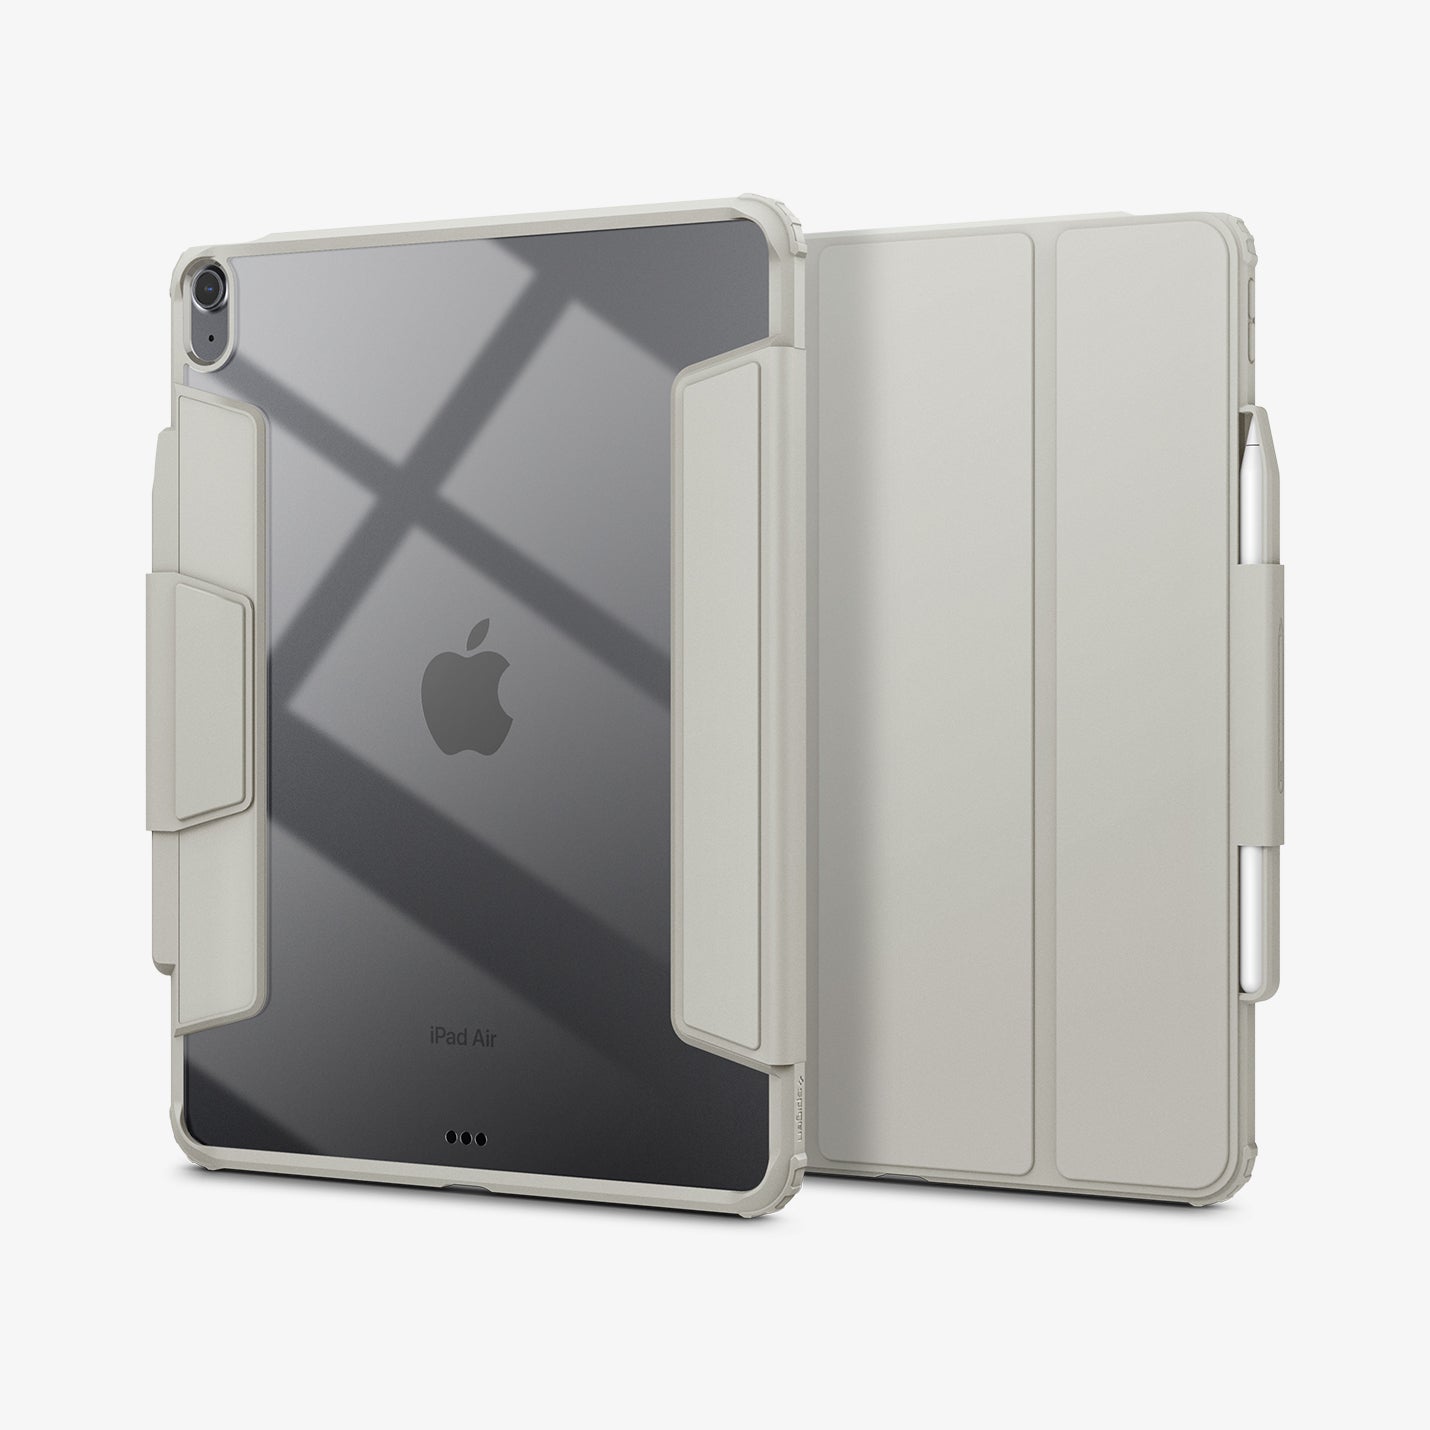 ACS07677 - iPad Air 12.9-inch Case Air Skin Pro in Gray showing the back, front and partial sides